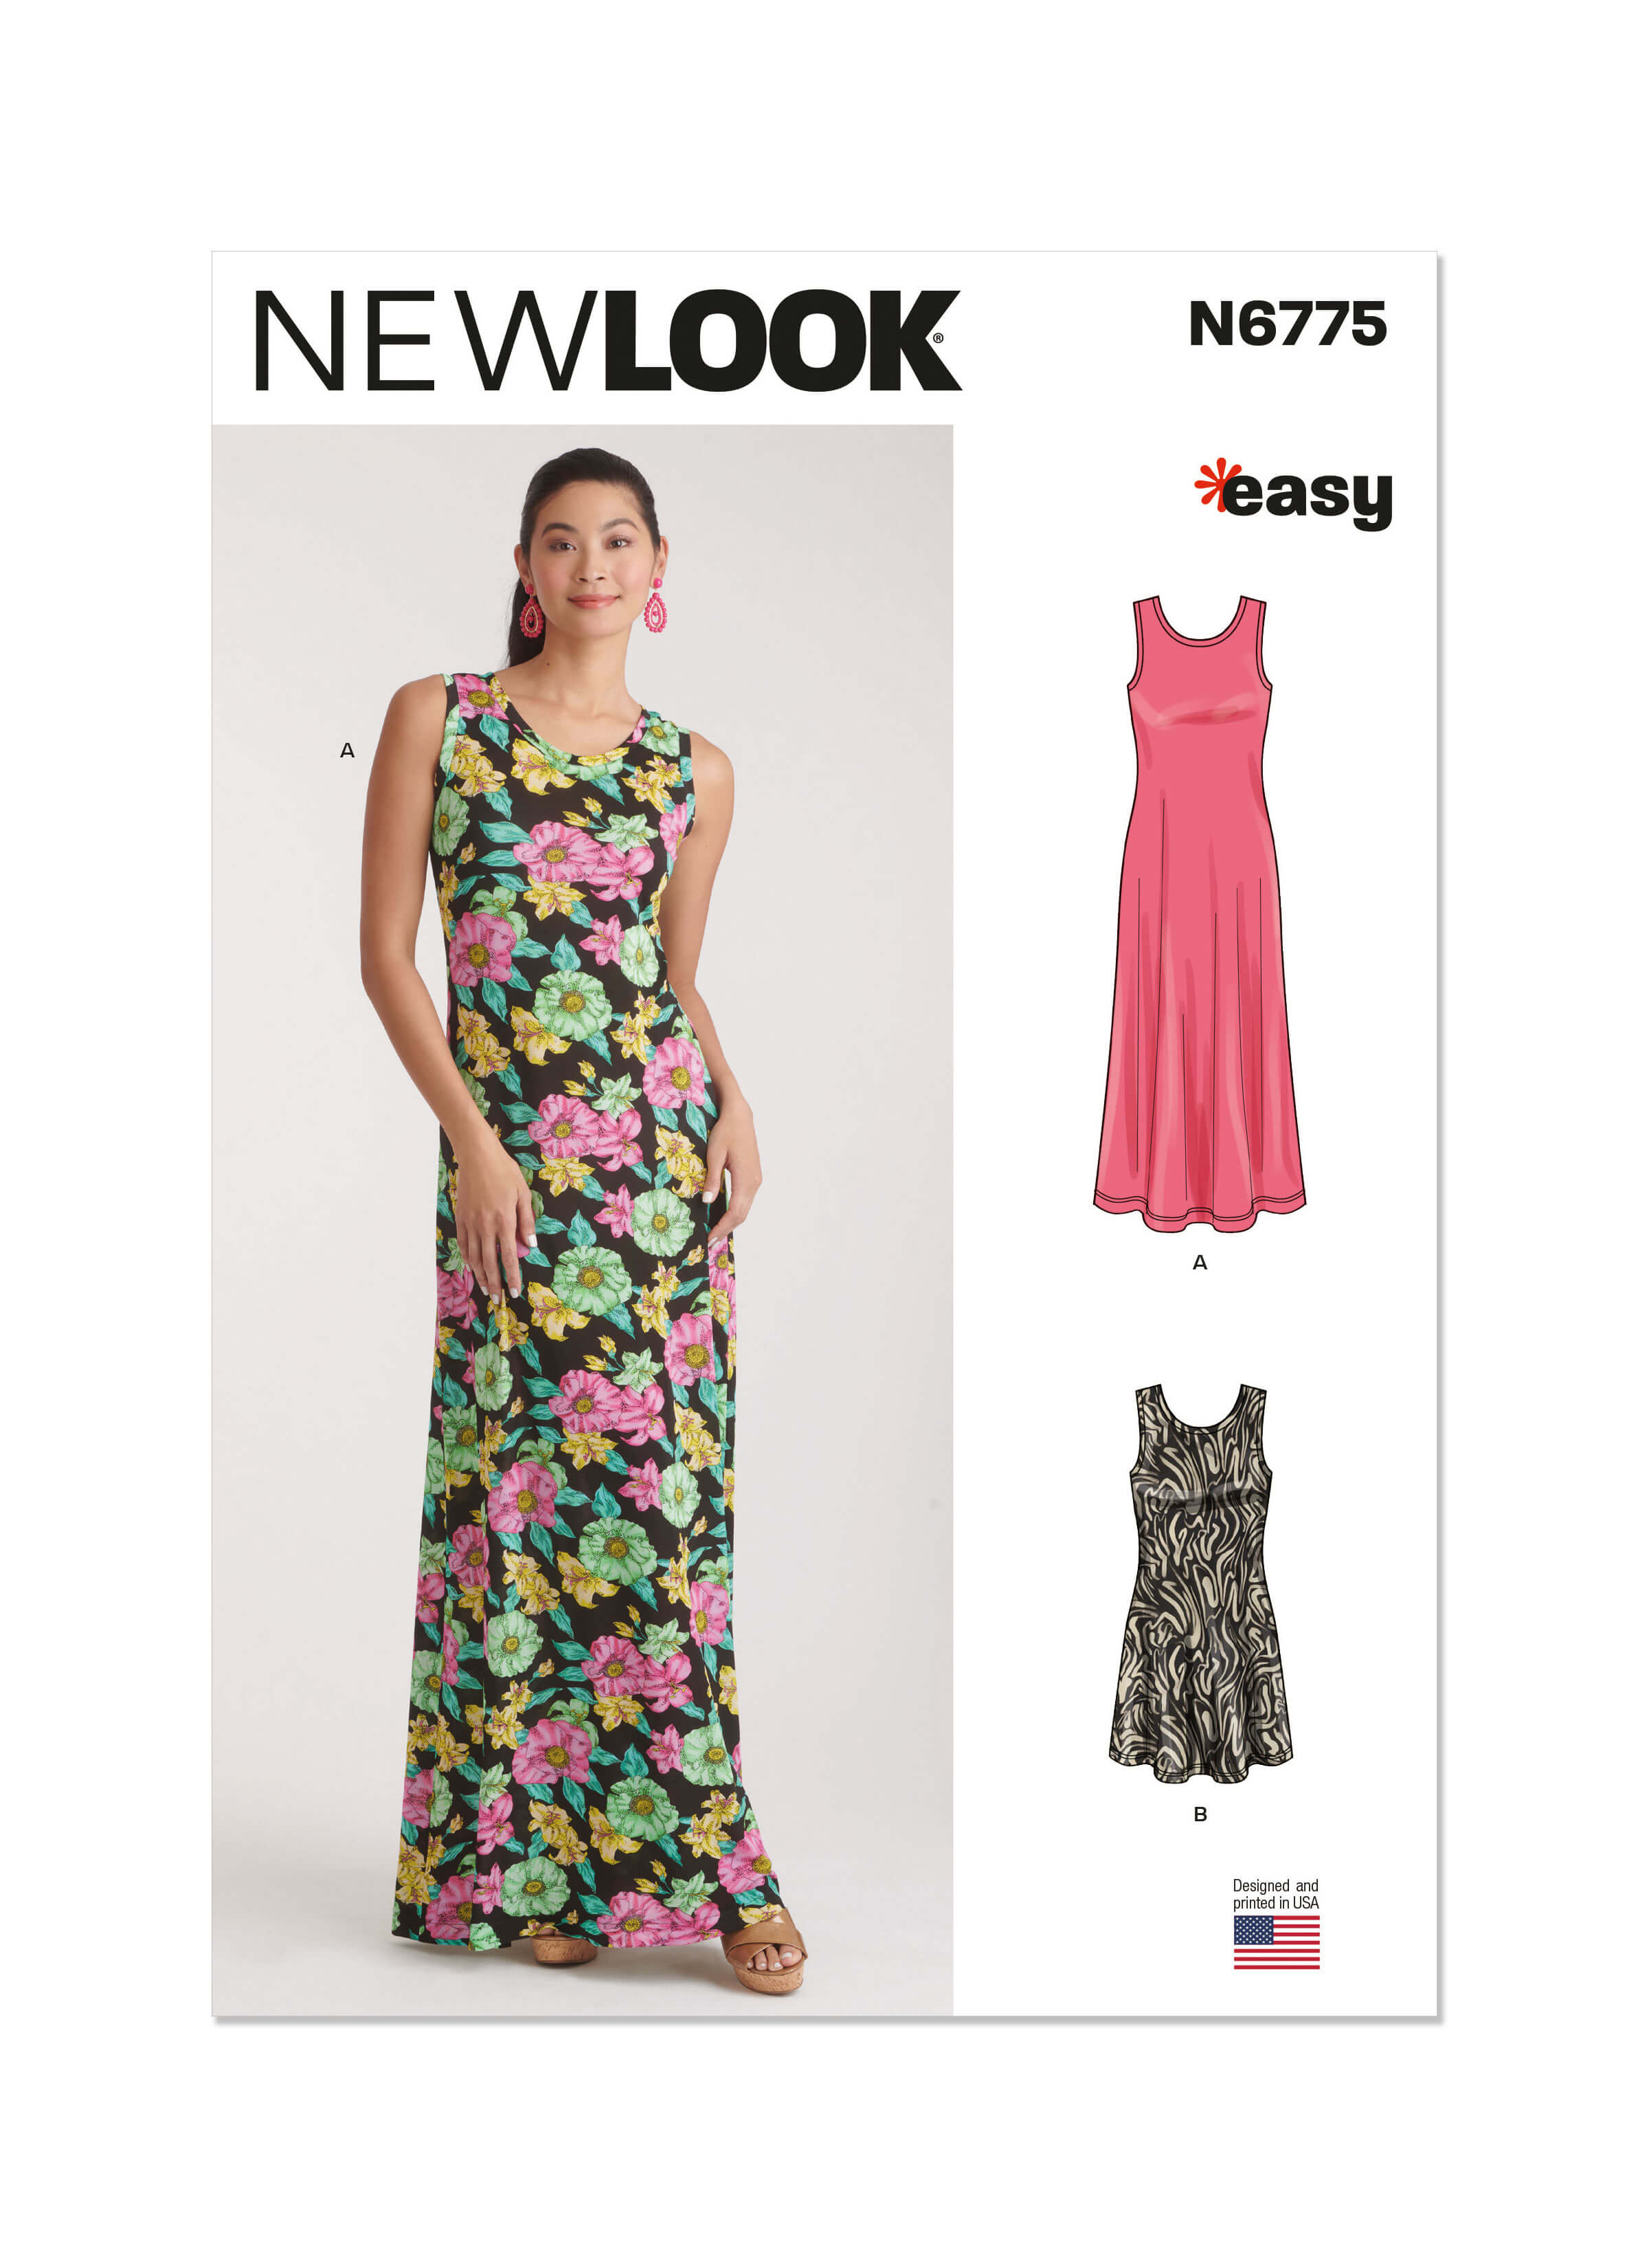 New Look Sewing Pattern N6775 Misses' Knit Dress in Two Lengths